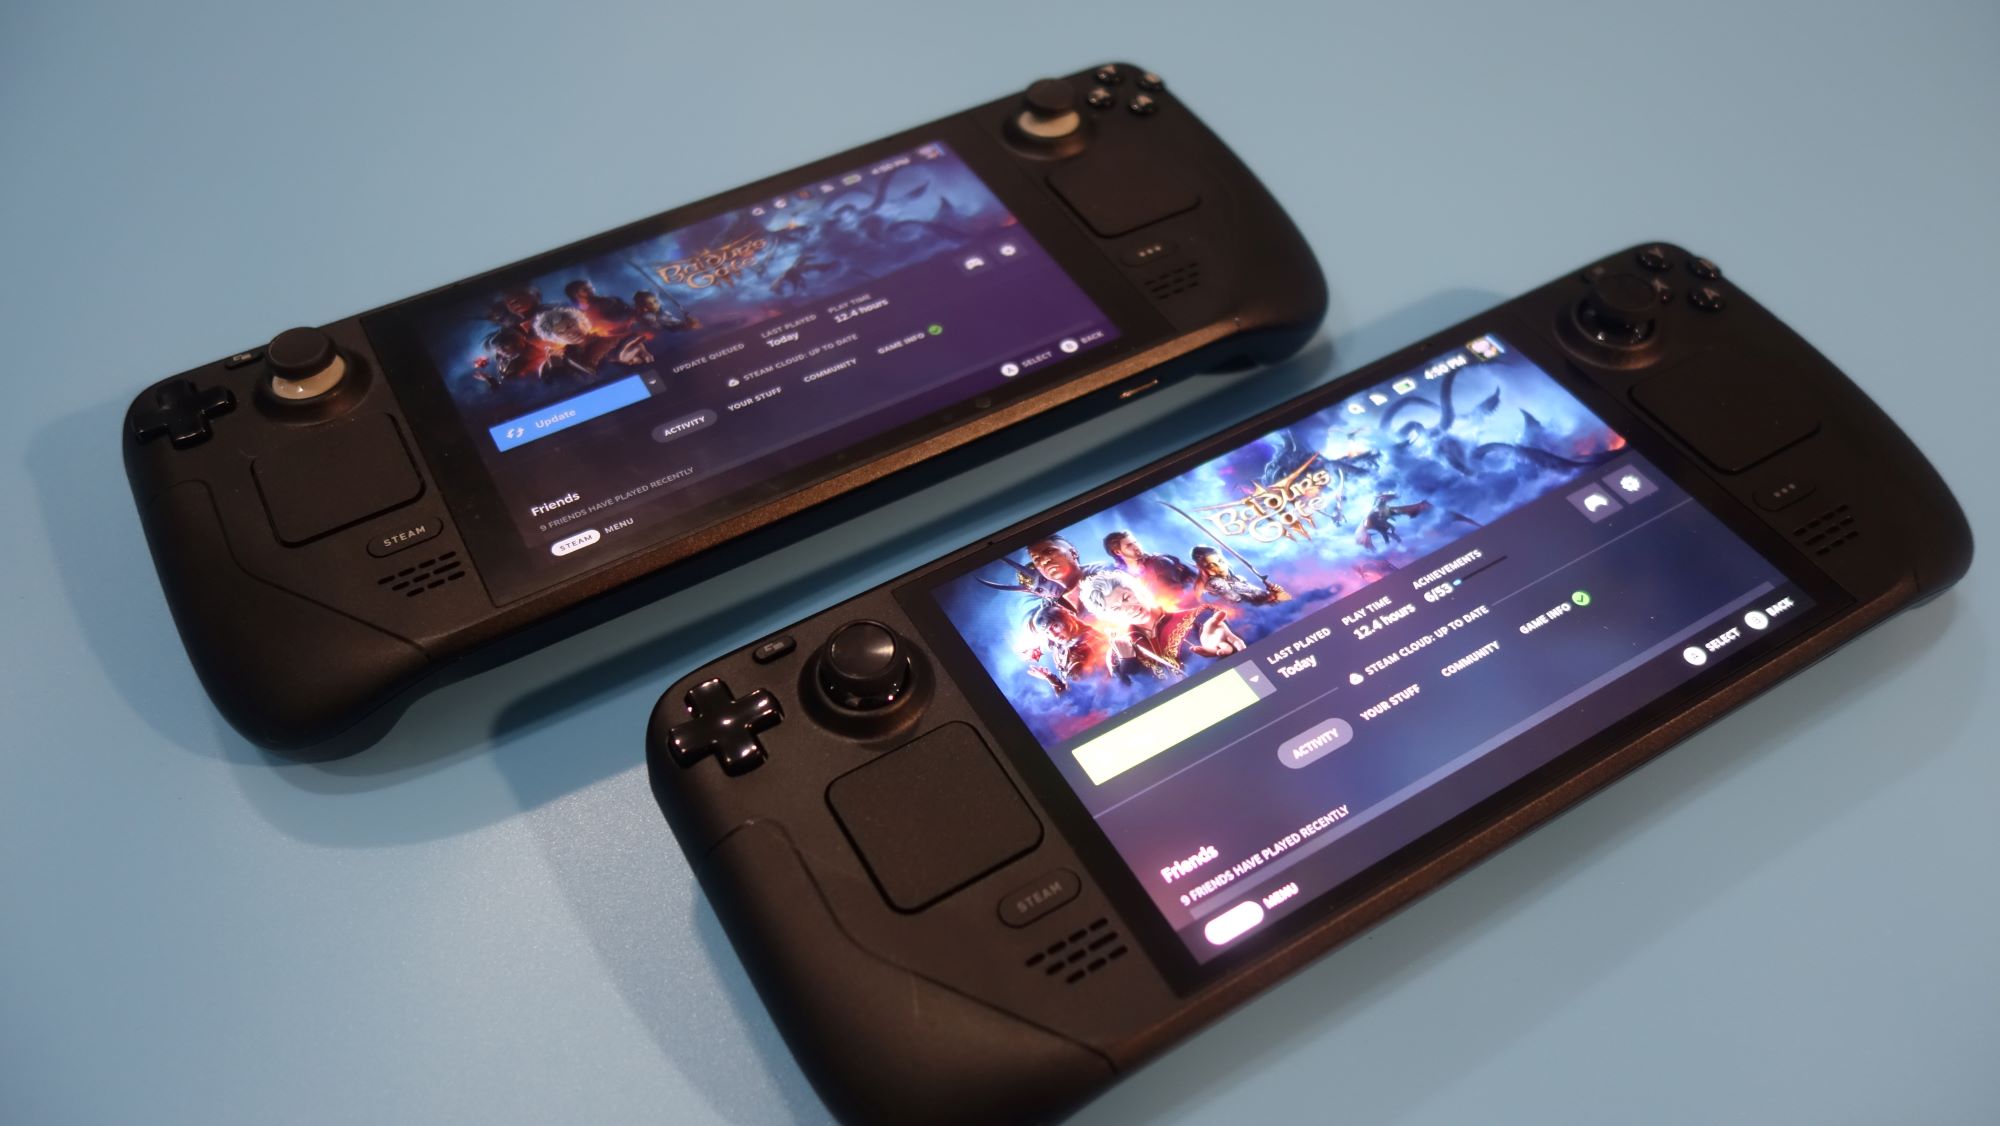 Steam Deck OLED Review: Worth The Weight